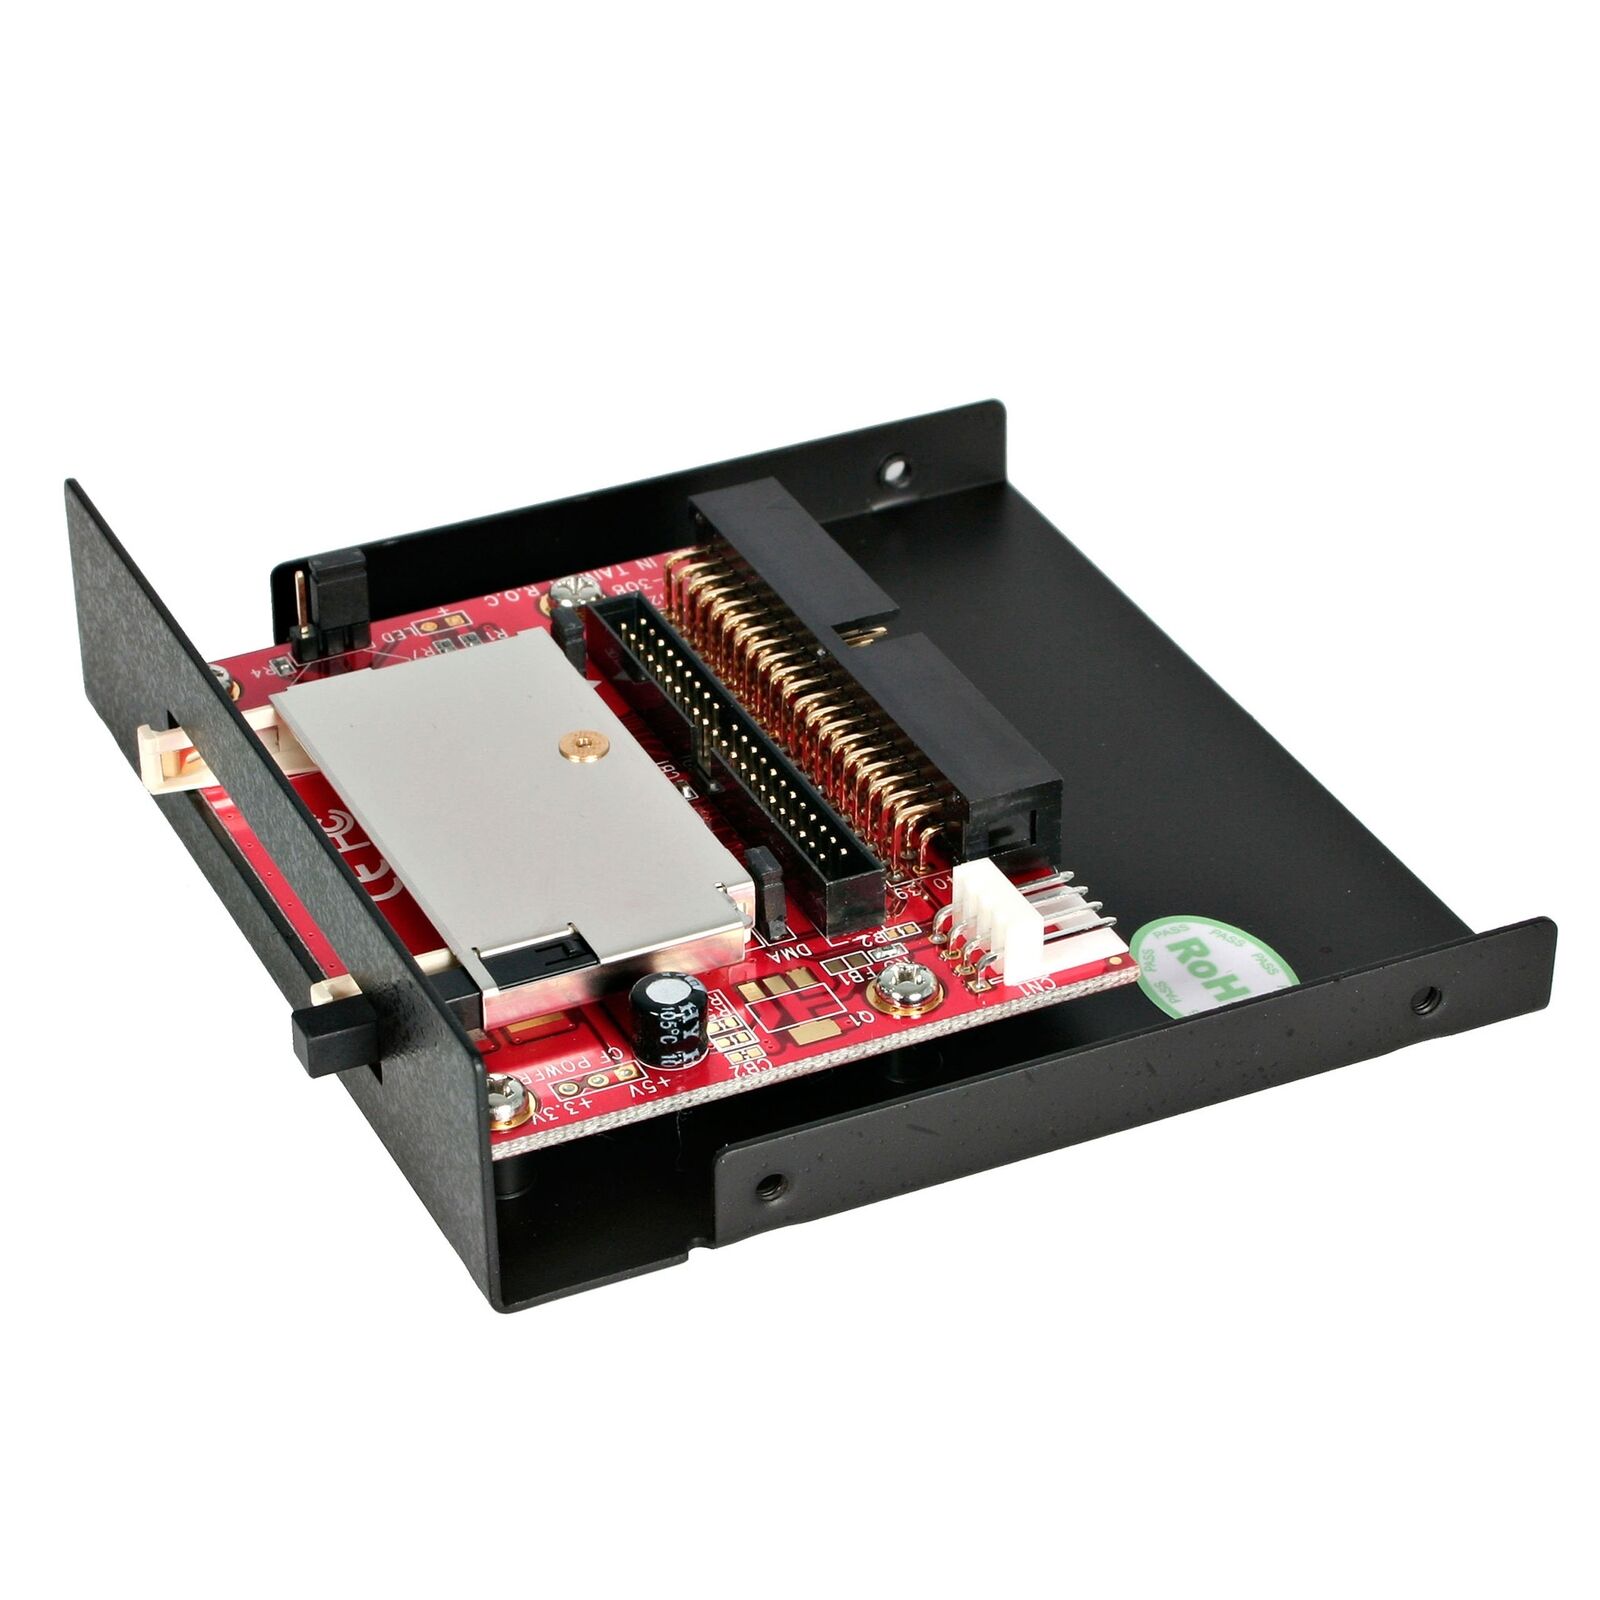 StarTech.com 3.5in Drive Bay IDE to Single CF SSD Adapter Card Reader (35BAYCF2I